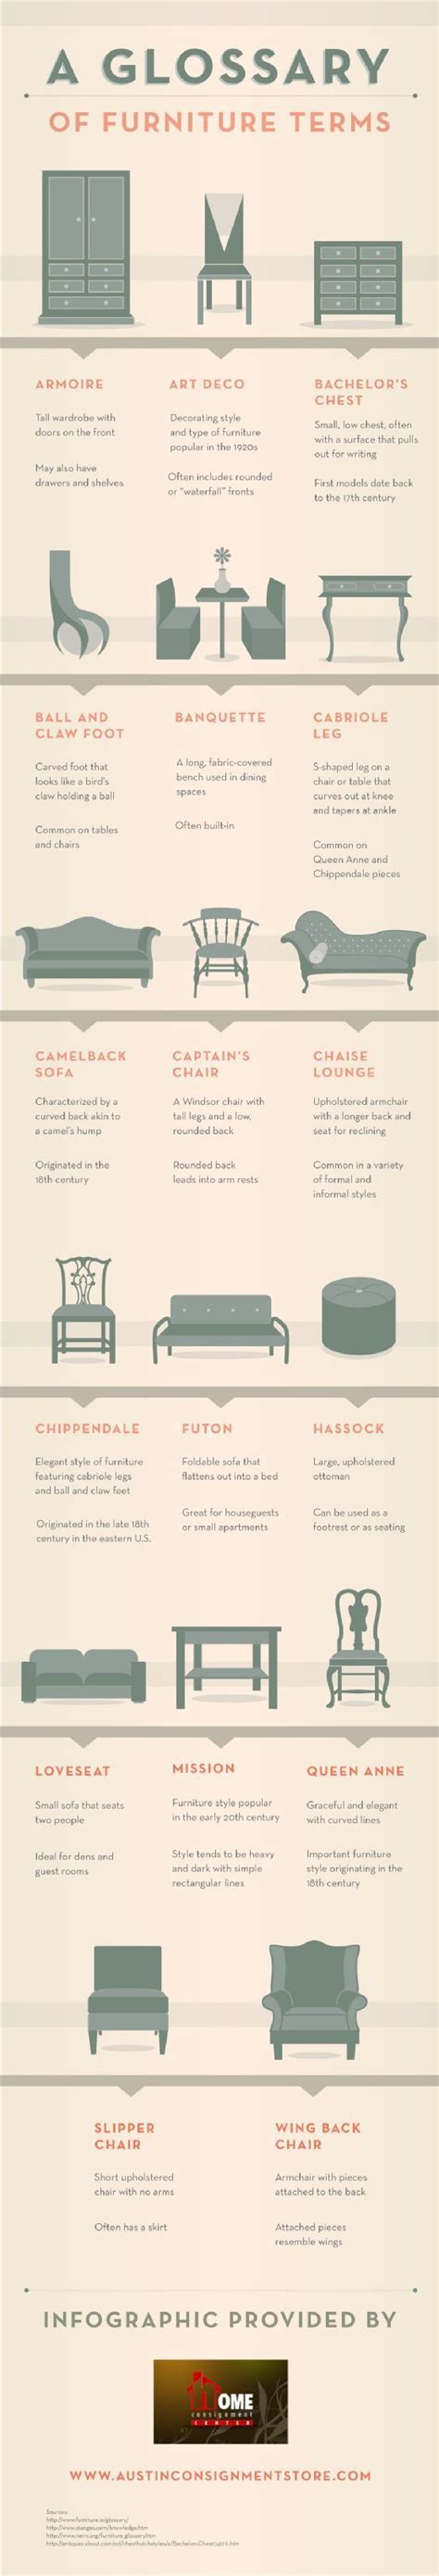 15 Interior Design Charts To Help You Feel Like A Professional